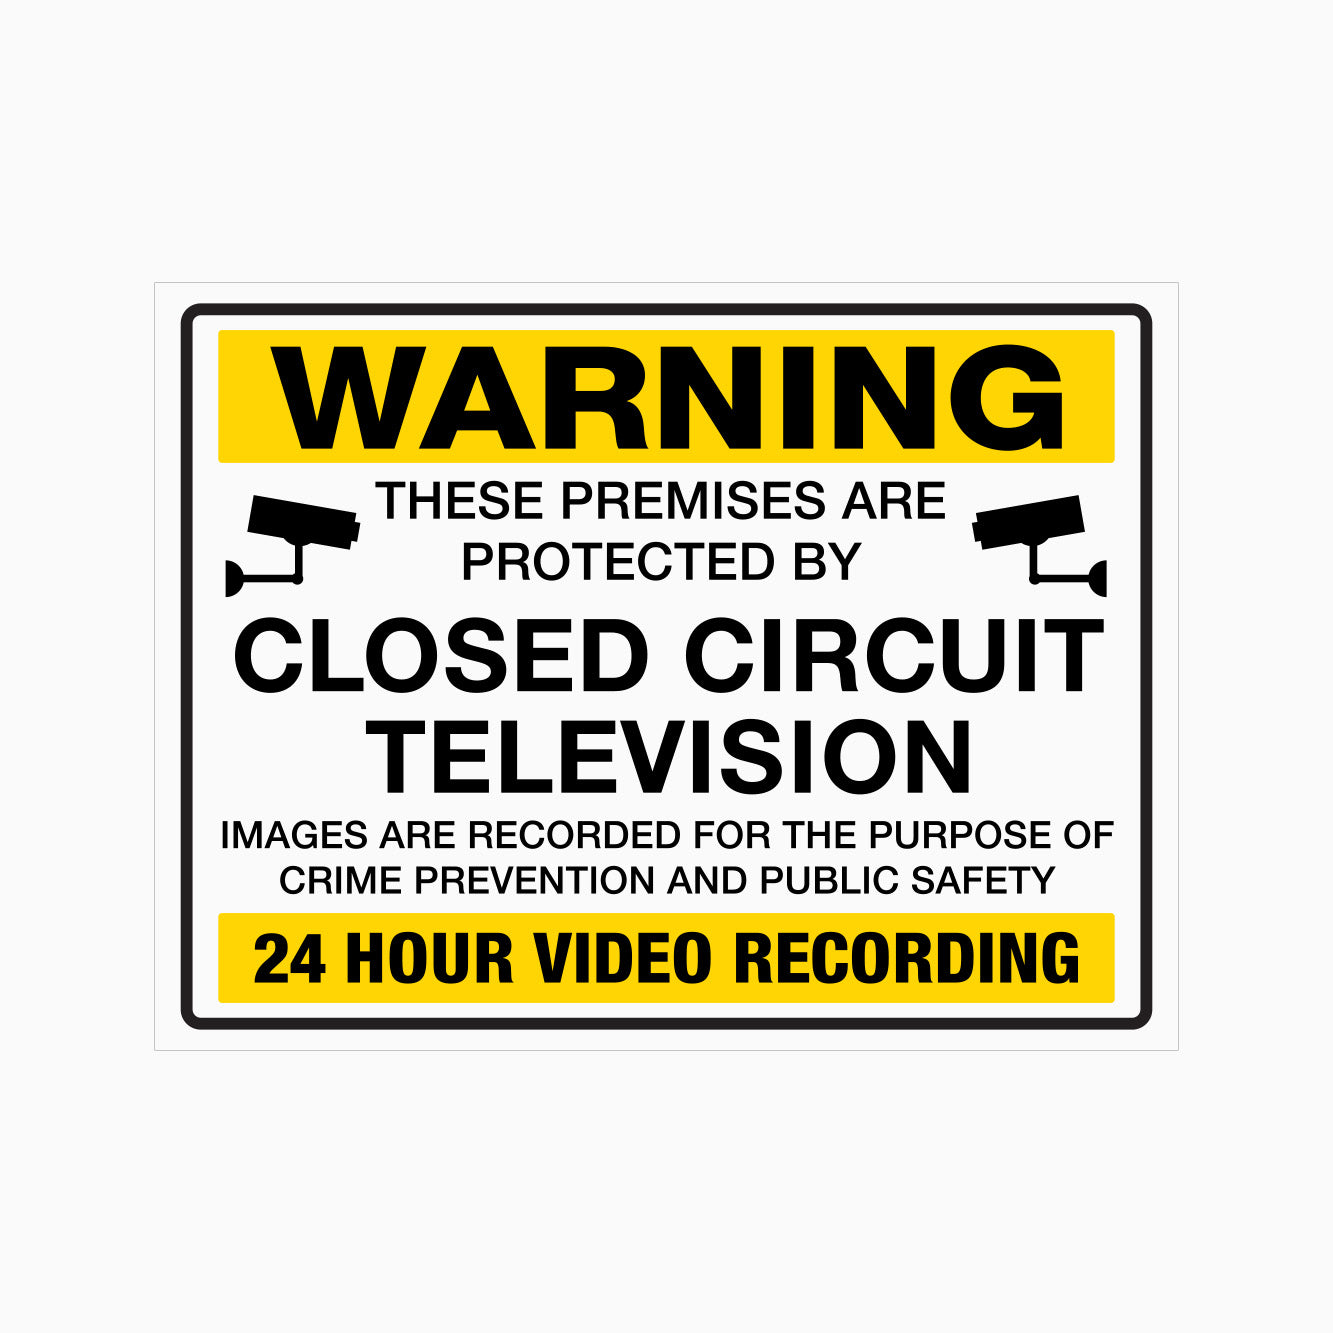 WARNING THESE PREMISES ARE PROTECTED BY CLOSED CIRCUIT TELEVISION - IMAGES ARE RECORDED FOR THE PURPOSE CRIME PREVENTION AND PUBLIC SAFETY. 24 HOUR VIDEO RECORDING SIGN